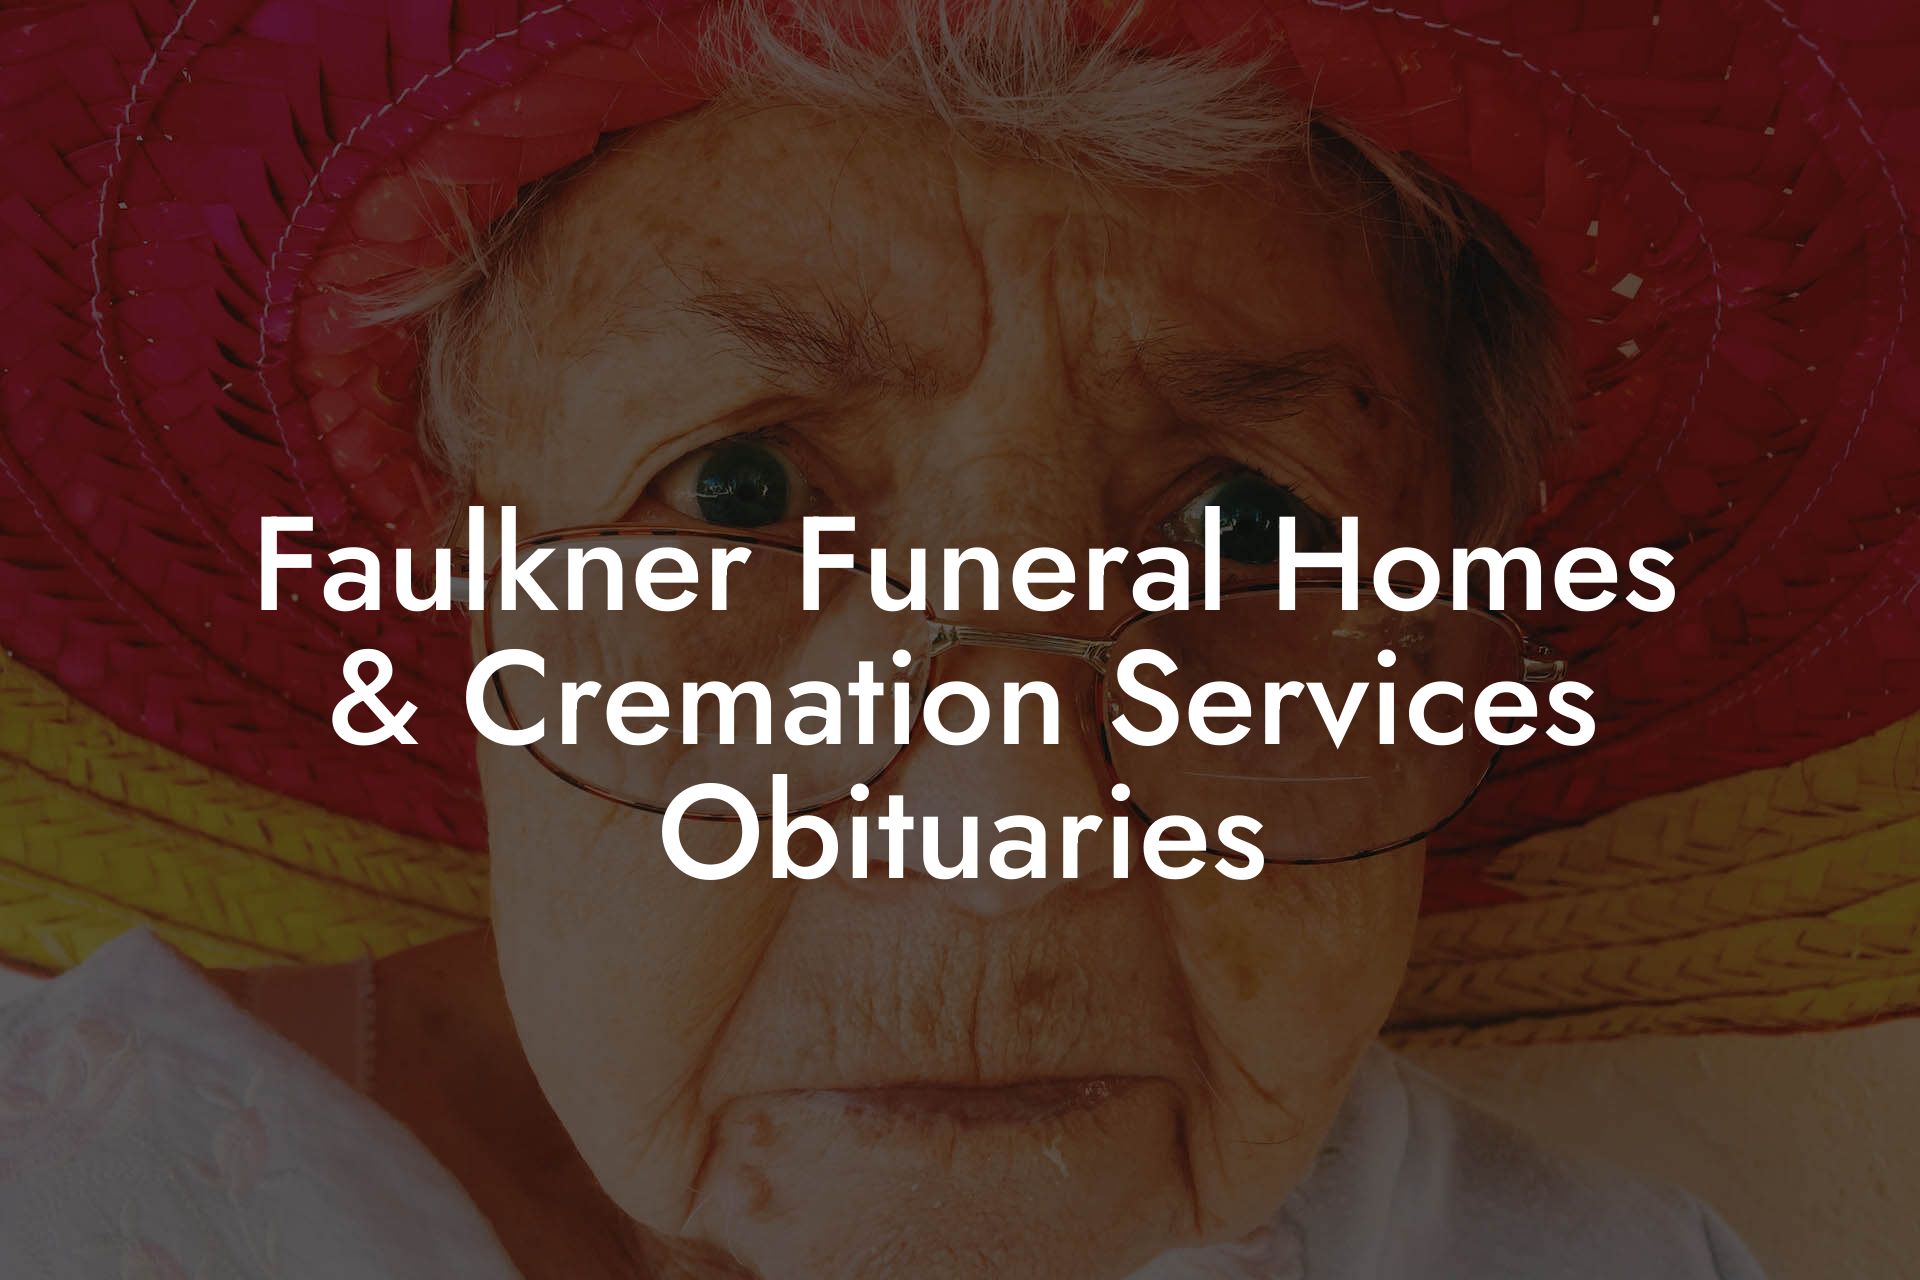 Faulkner Funeral Homes & Cremation Services Obituaries